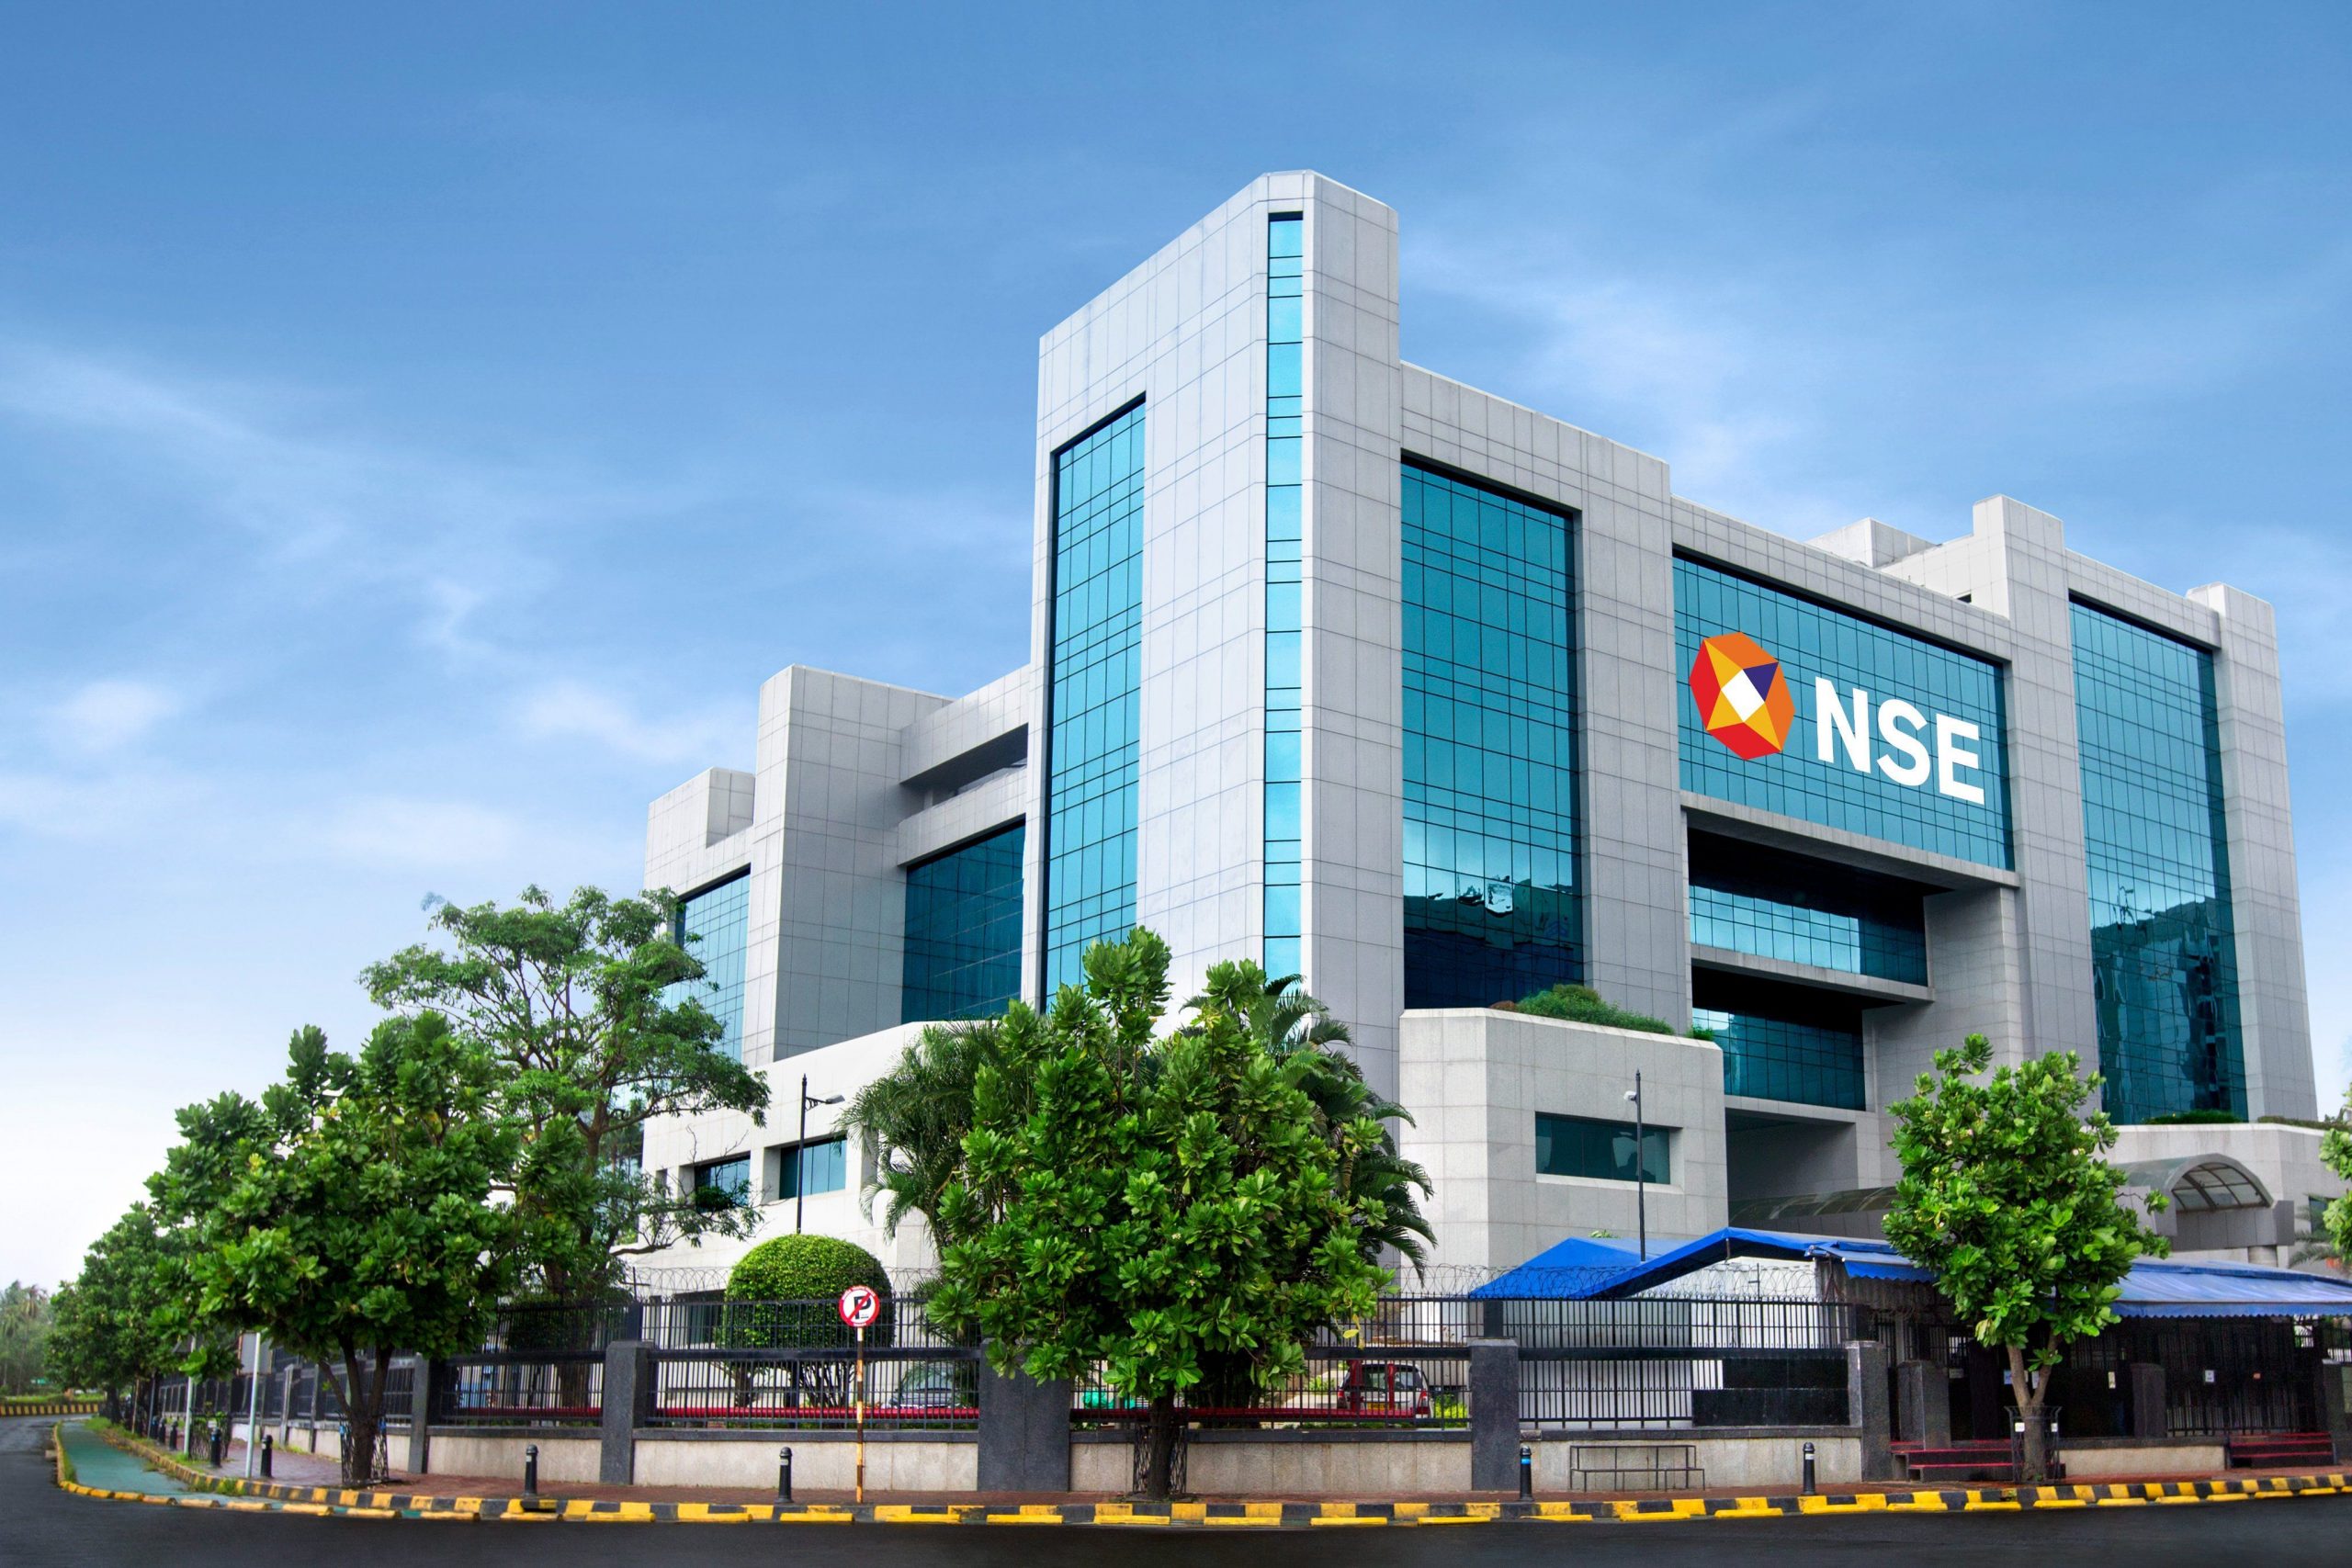 NSE F&O Ban: IHFL and RBL Bank under ban on Wednesday, June 22, 2022